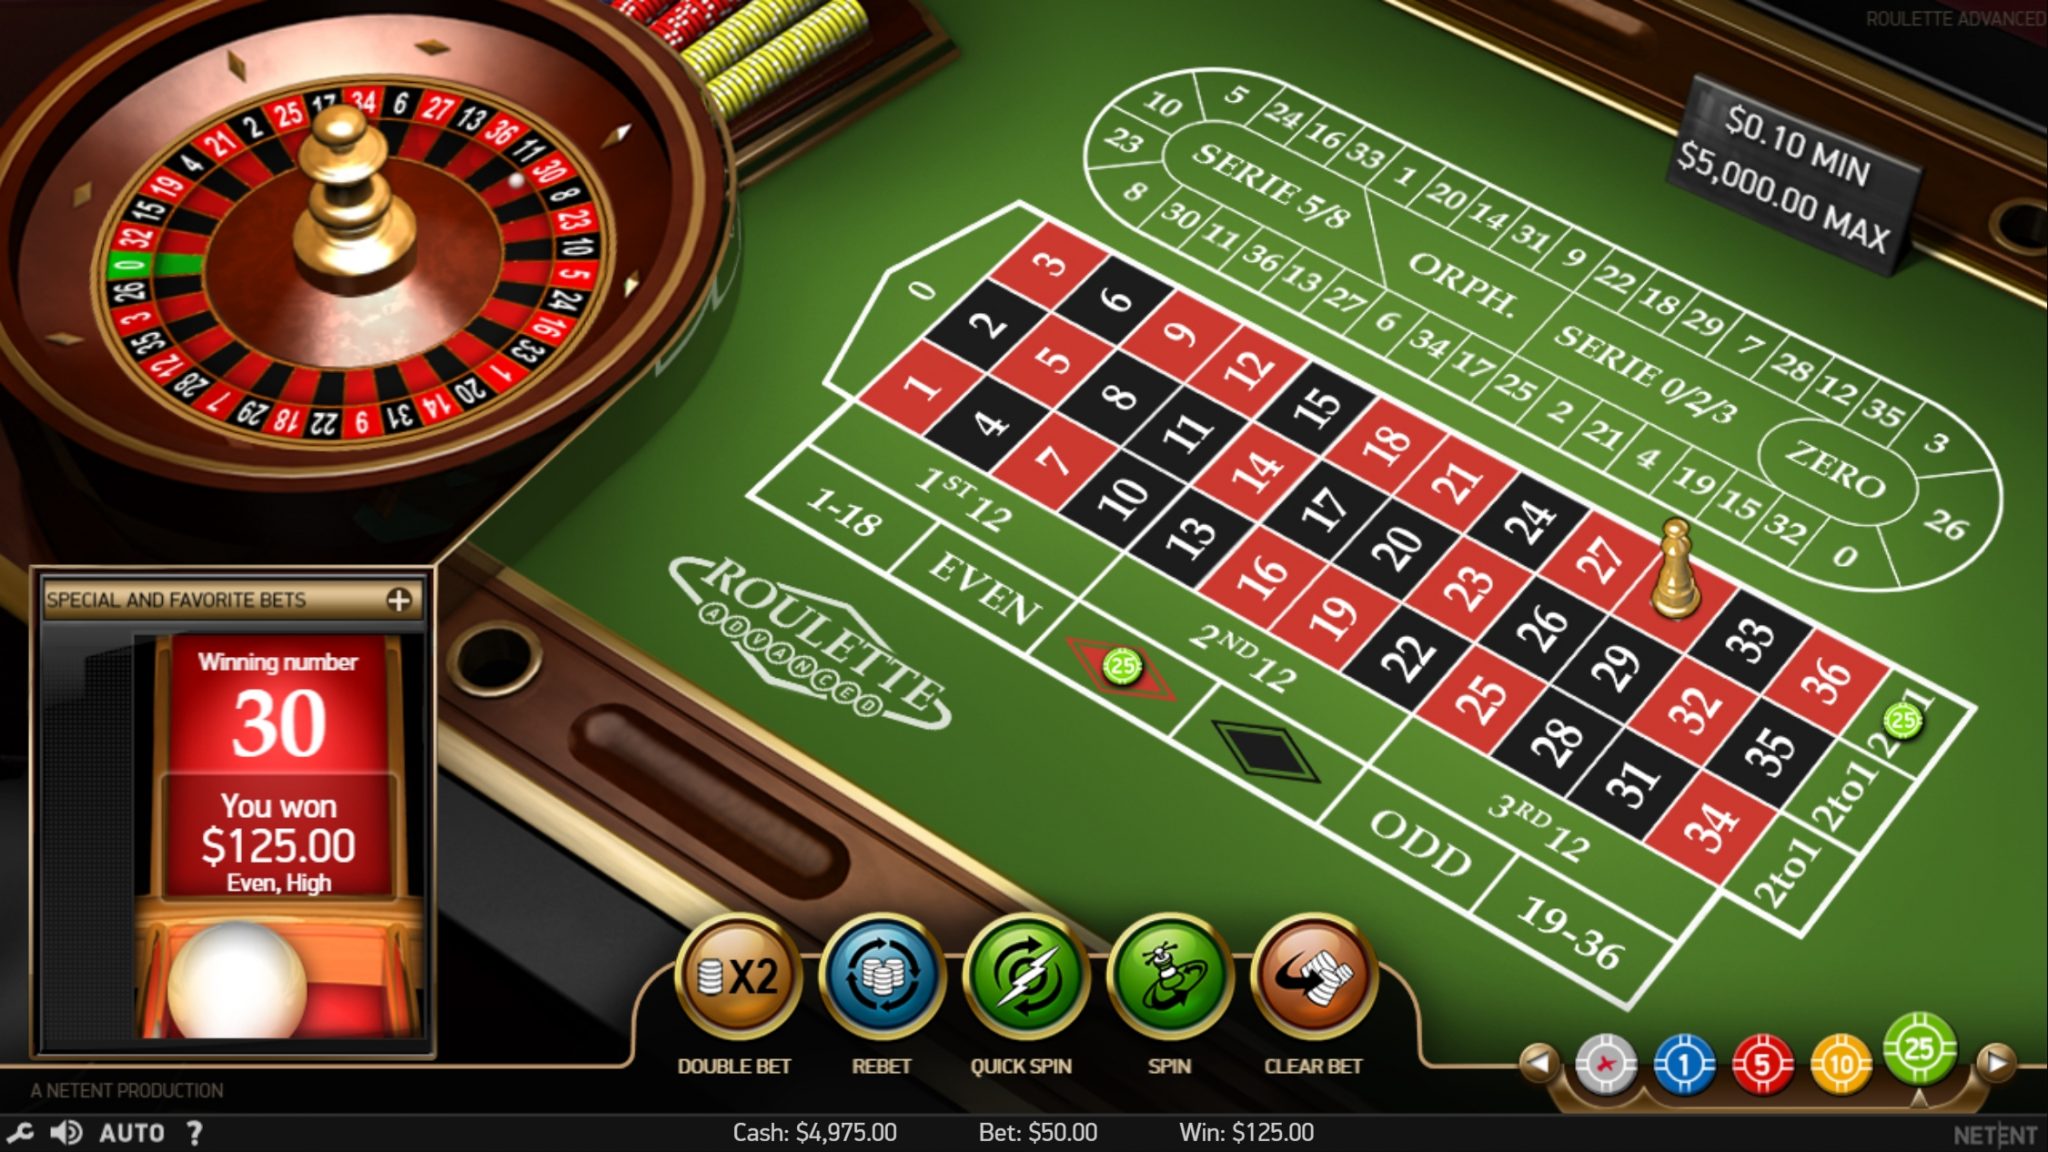 How to play American roulette online